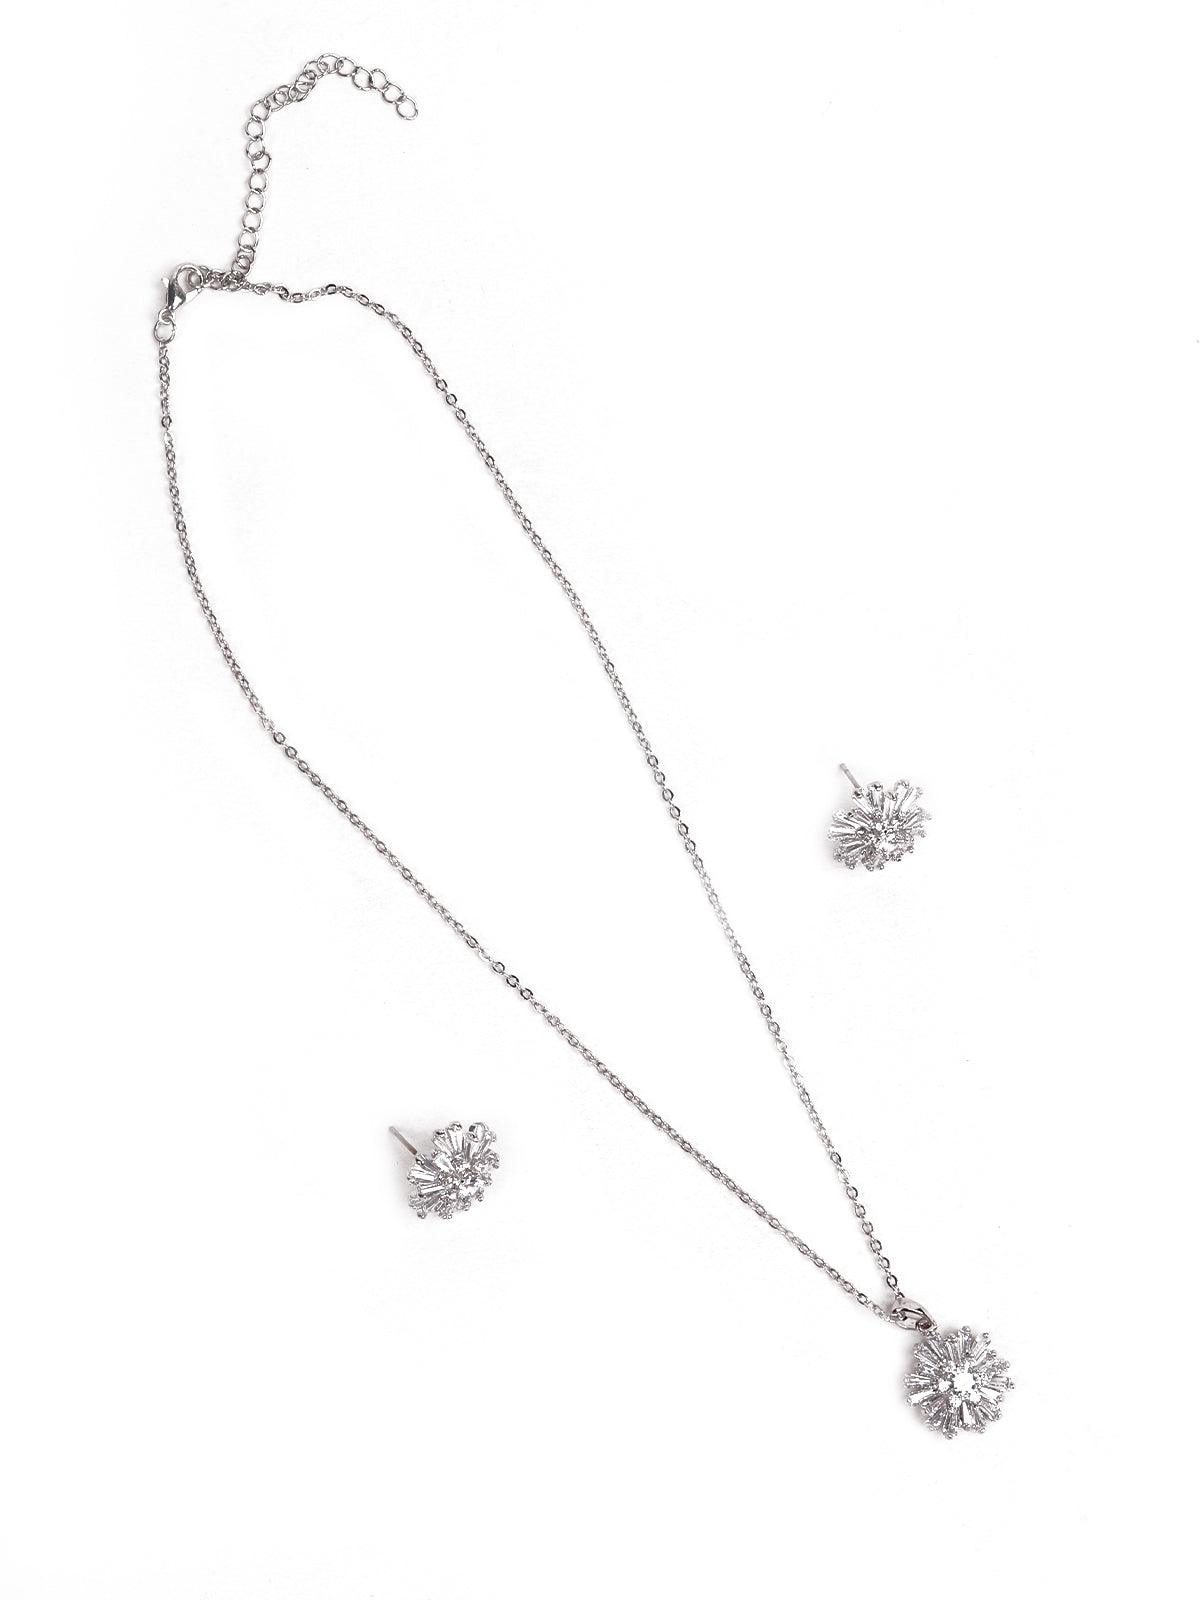 Women's Gorgeous Crystal Beautiful Necklace Set - Odette